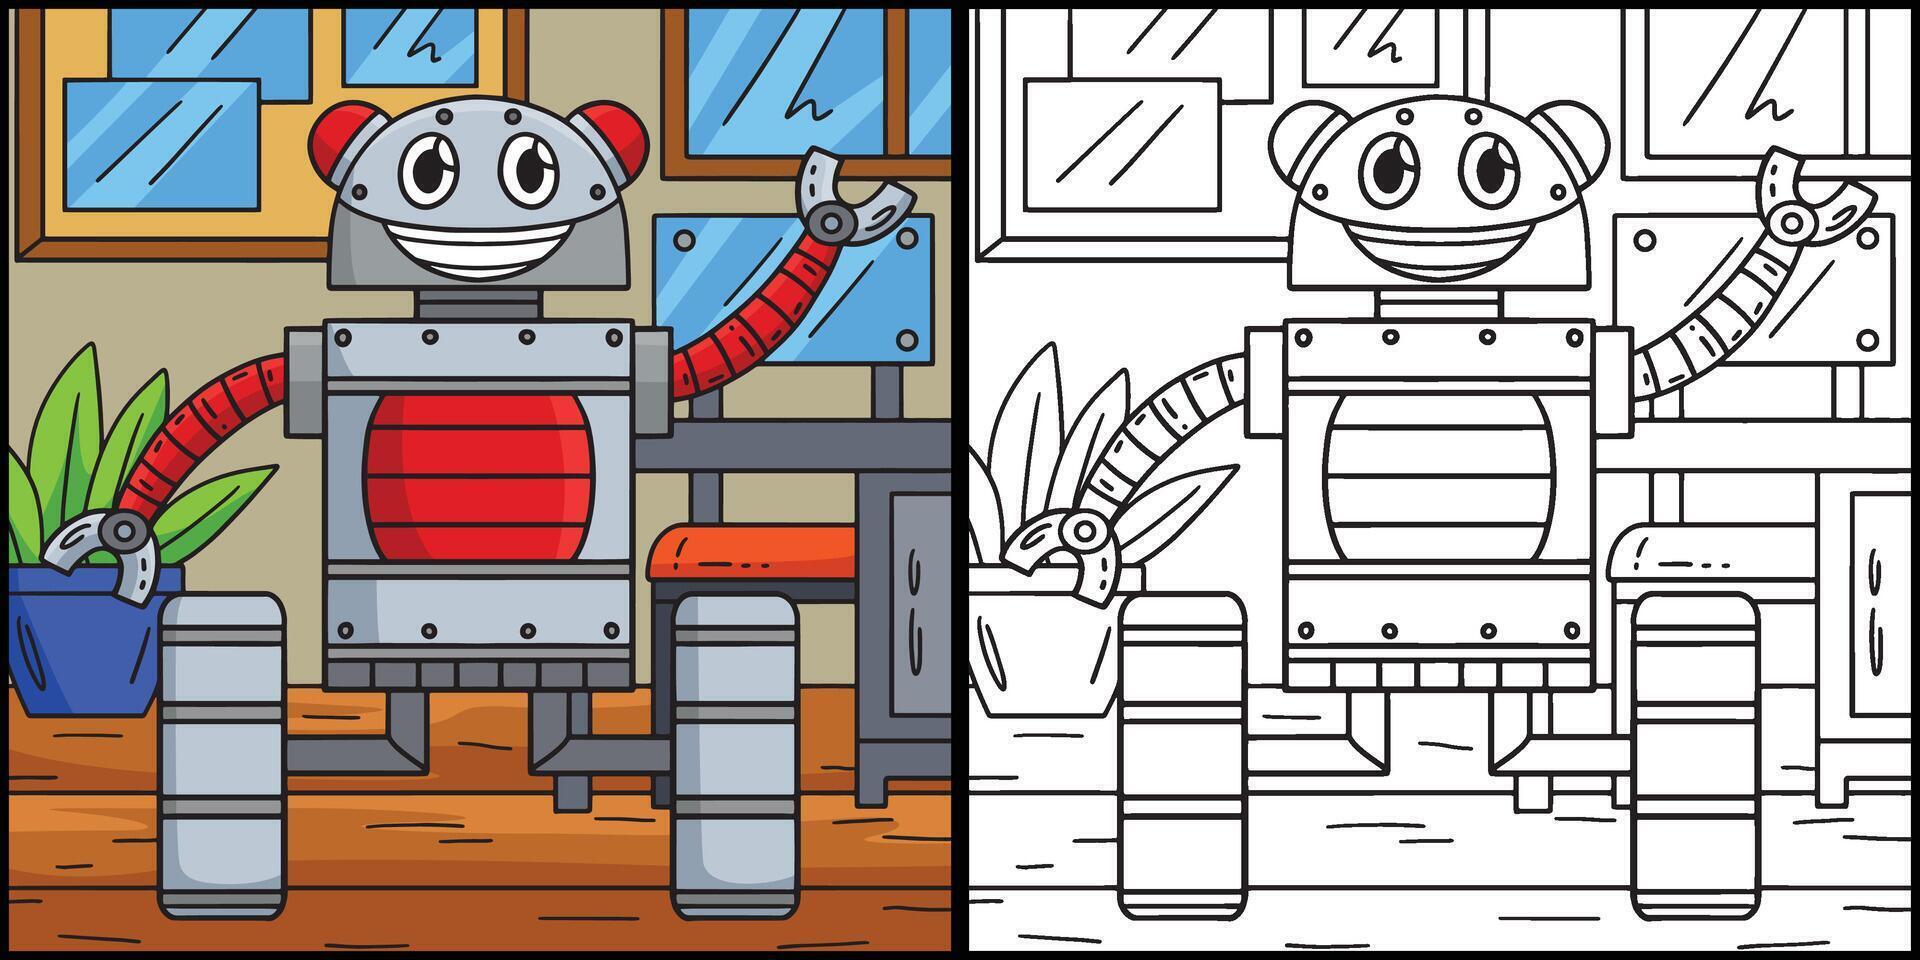 Robot with Wheels Coloring Page Illustration vector